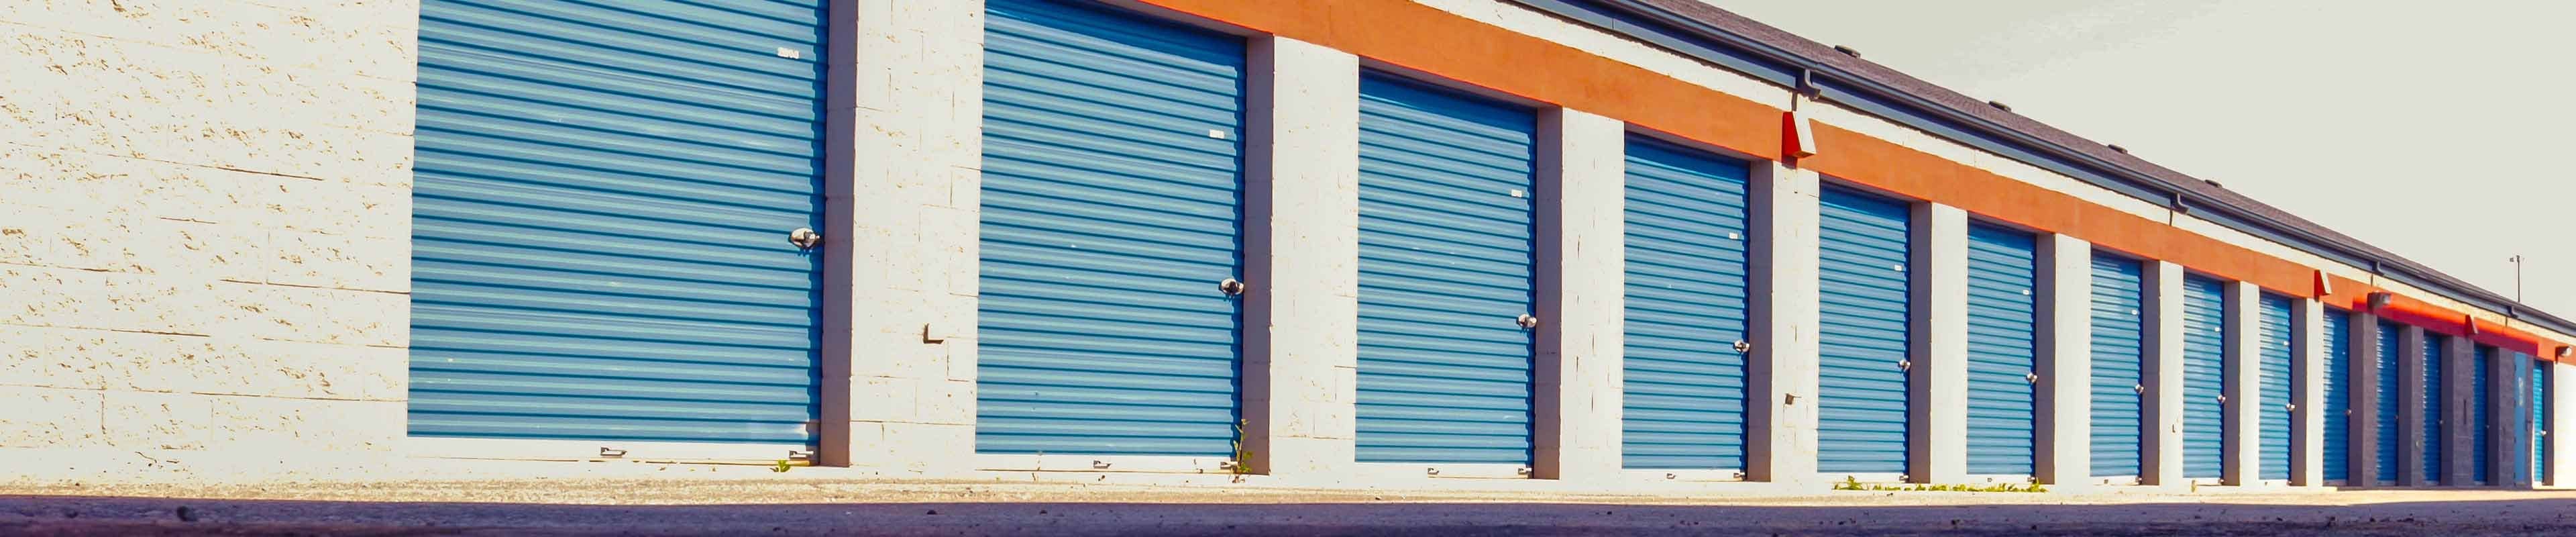 A row of fourteen storage units with sky blue doors and an orange overhang set into a white concrete block building.